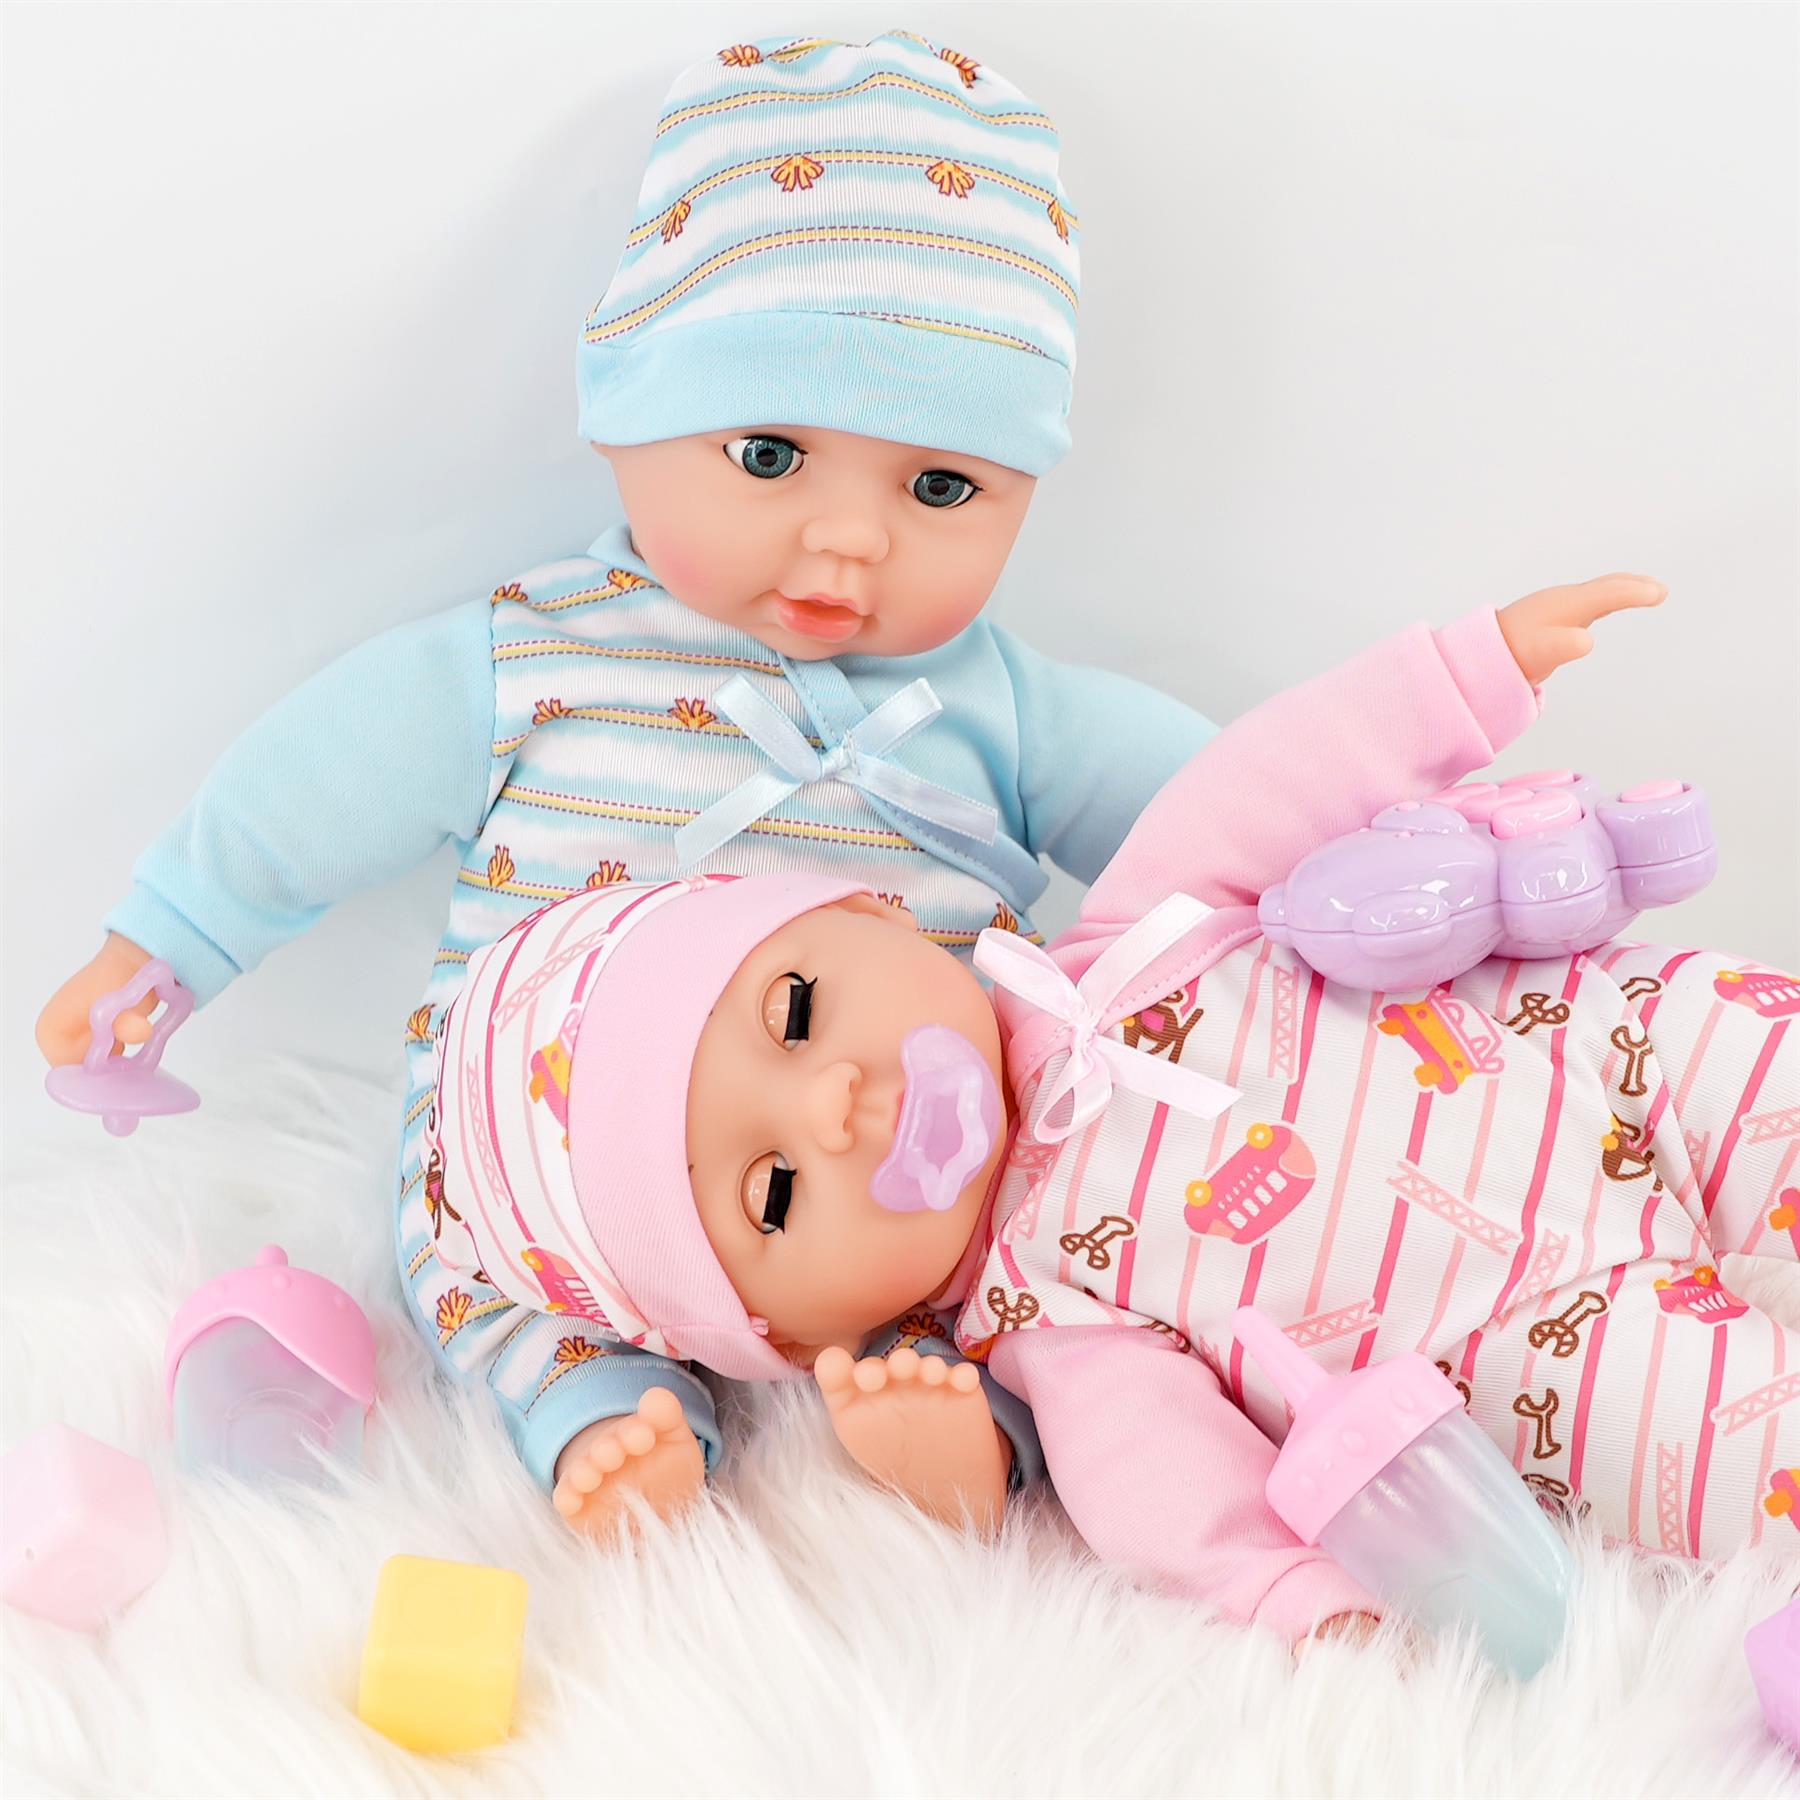 Twins Baby Girl & Boy Dolls by The Magic Toy Shop - The Magic Toy Shop